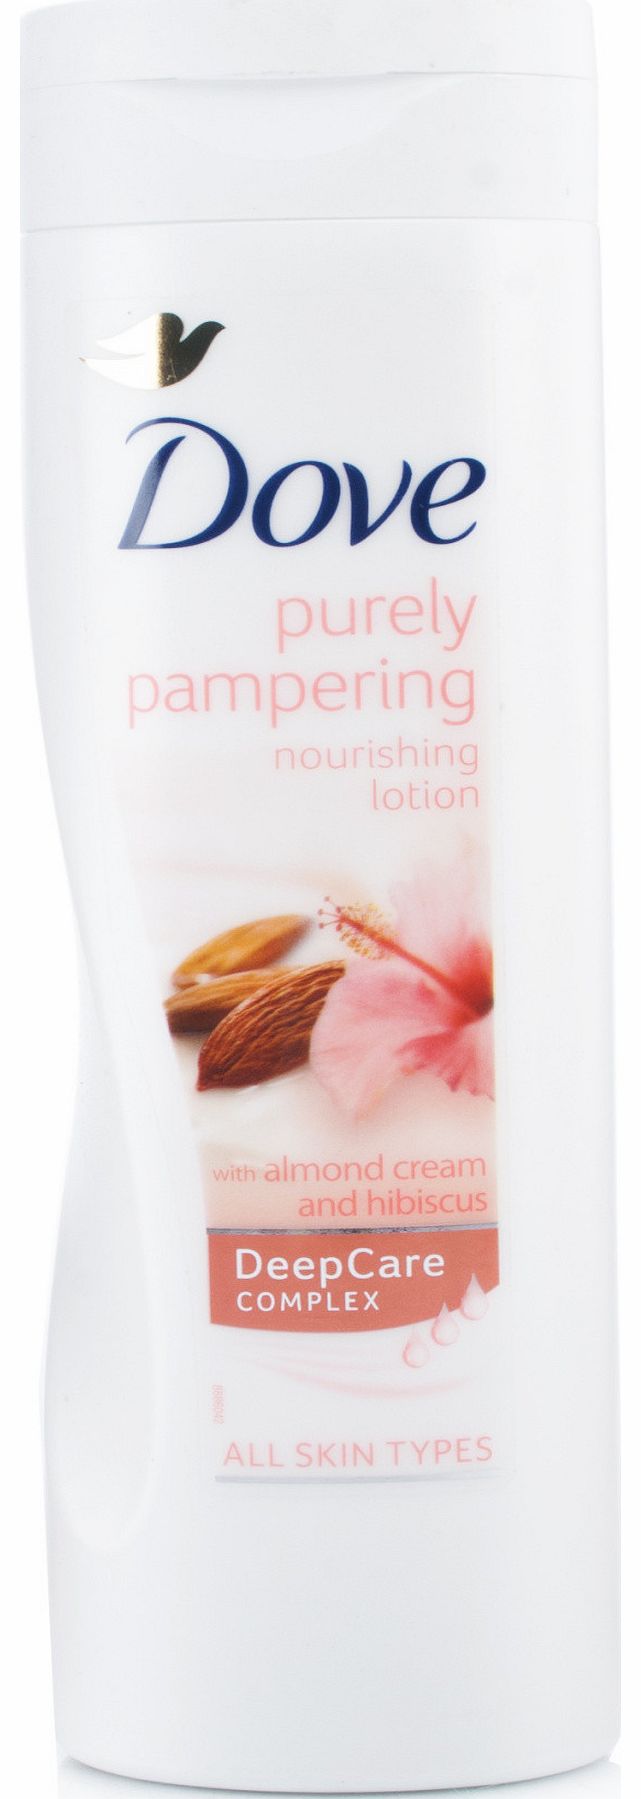 Purely Pampering Almond Lotion 250ml